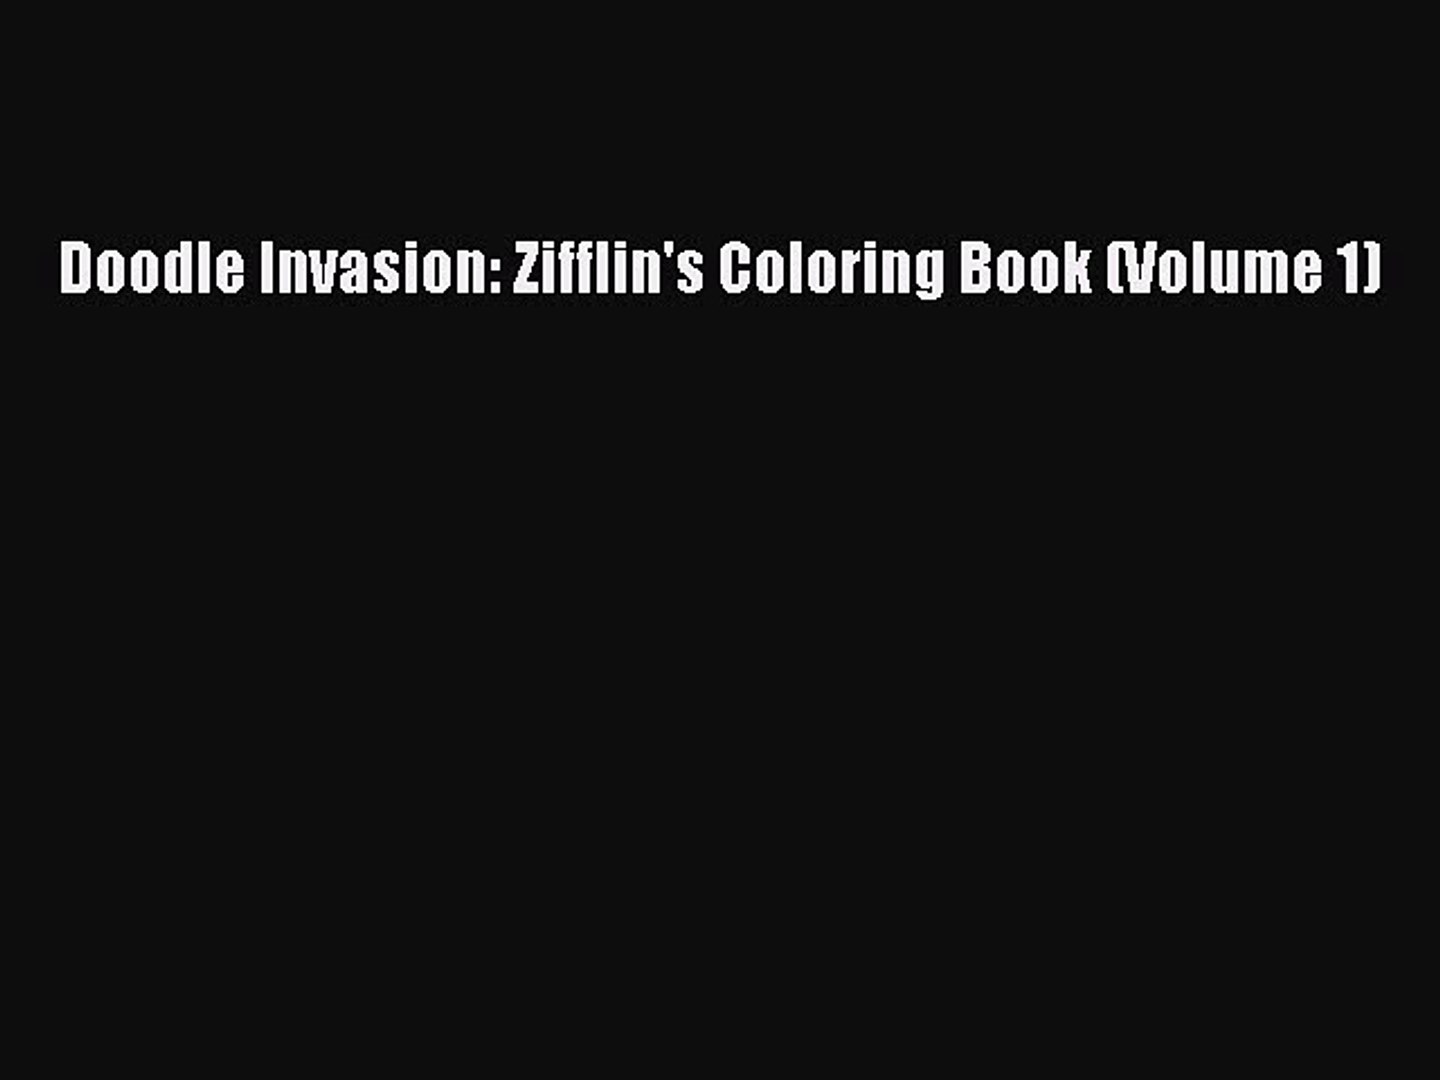 Download Pdf Download Doodle Invasion Zifflin S Coloring Book Volume 1 Download Video Dailymotion